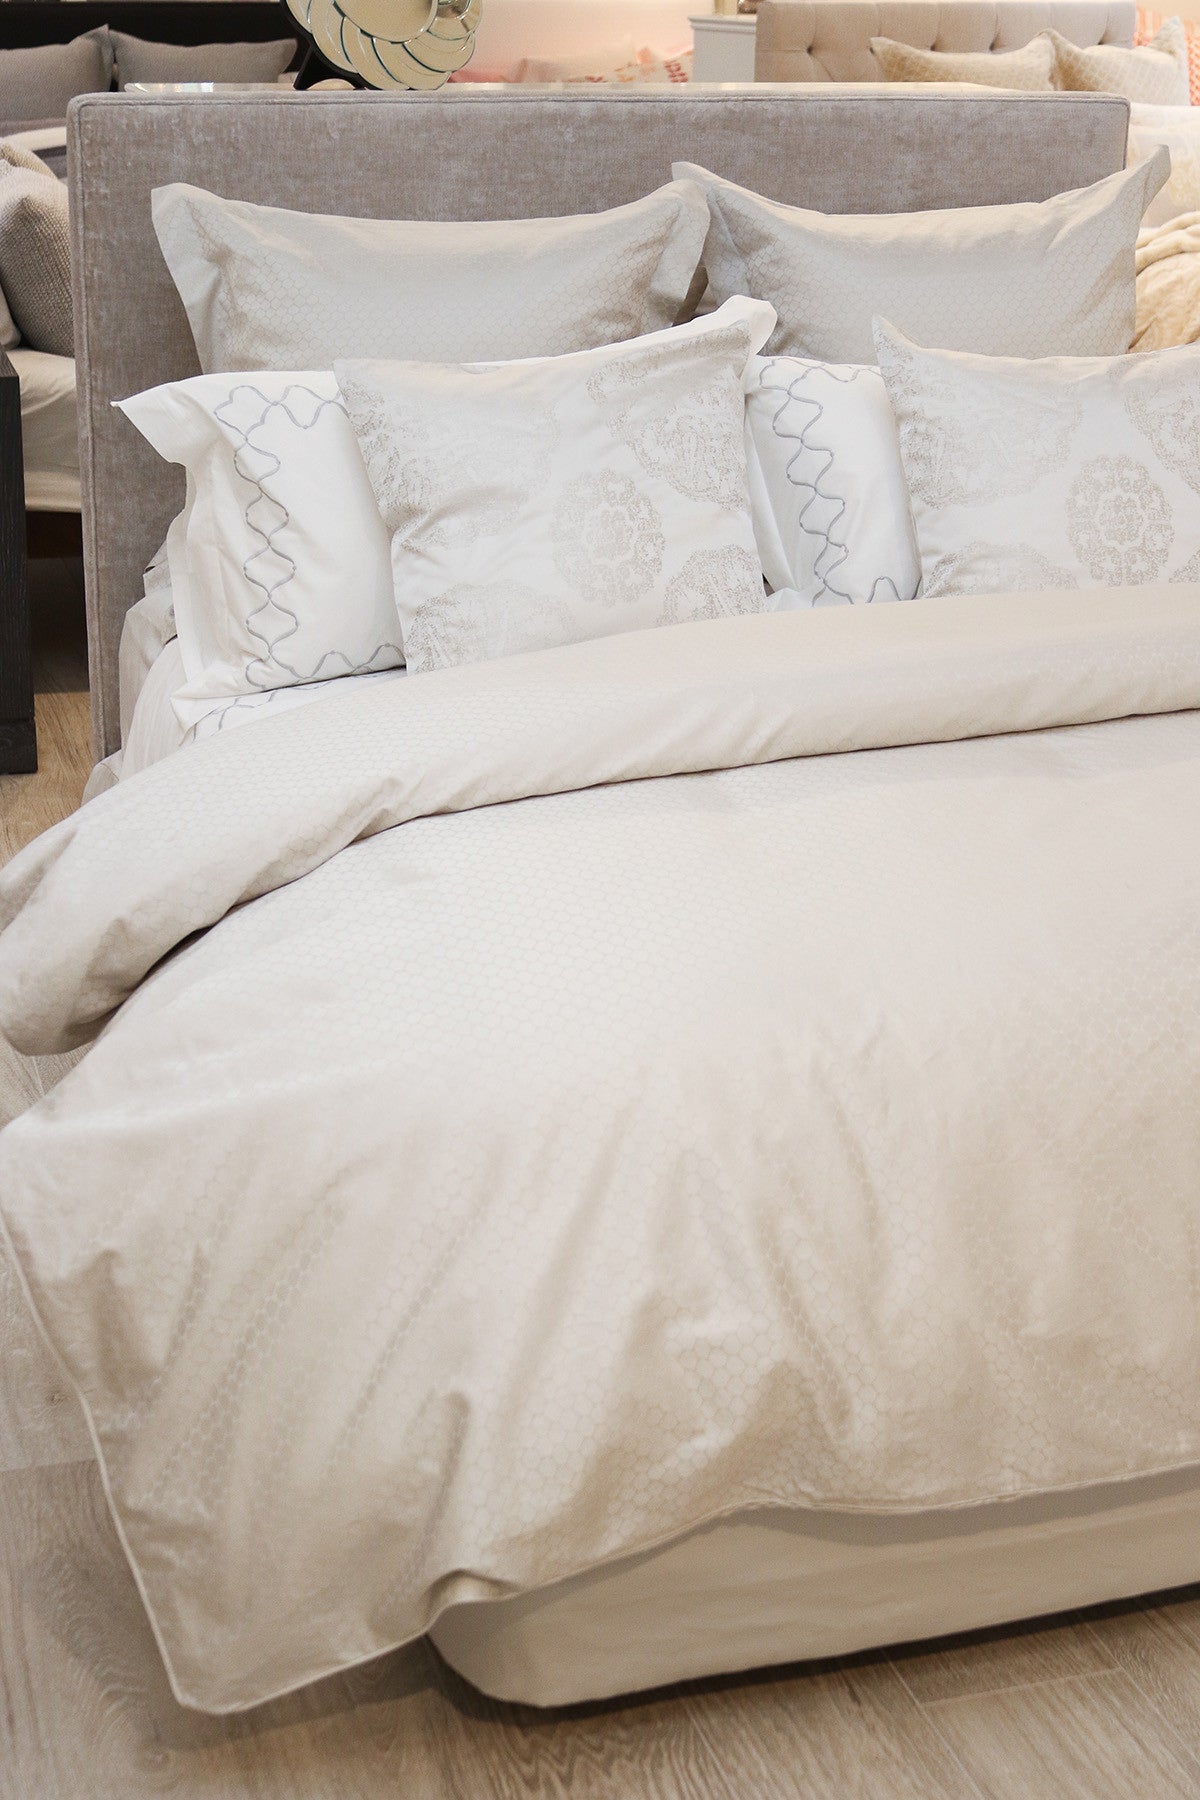 The Simple Trick to Making Your Duvet Appear Fluffier